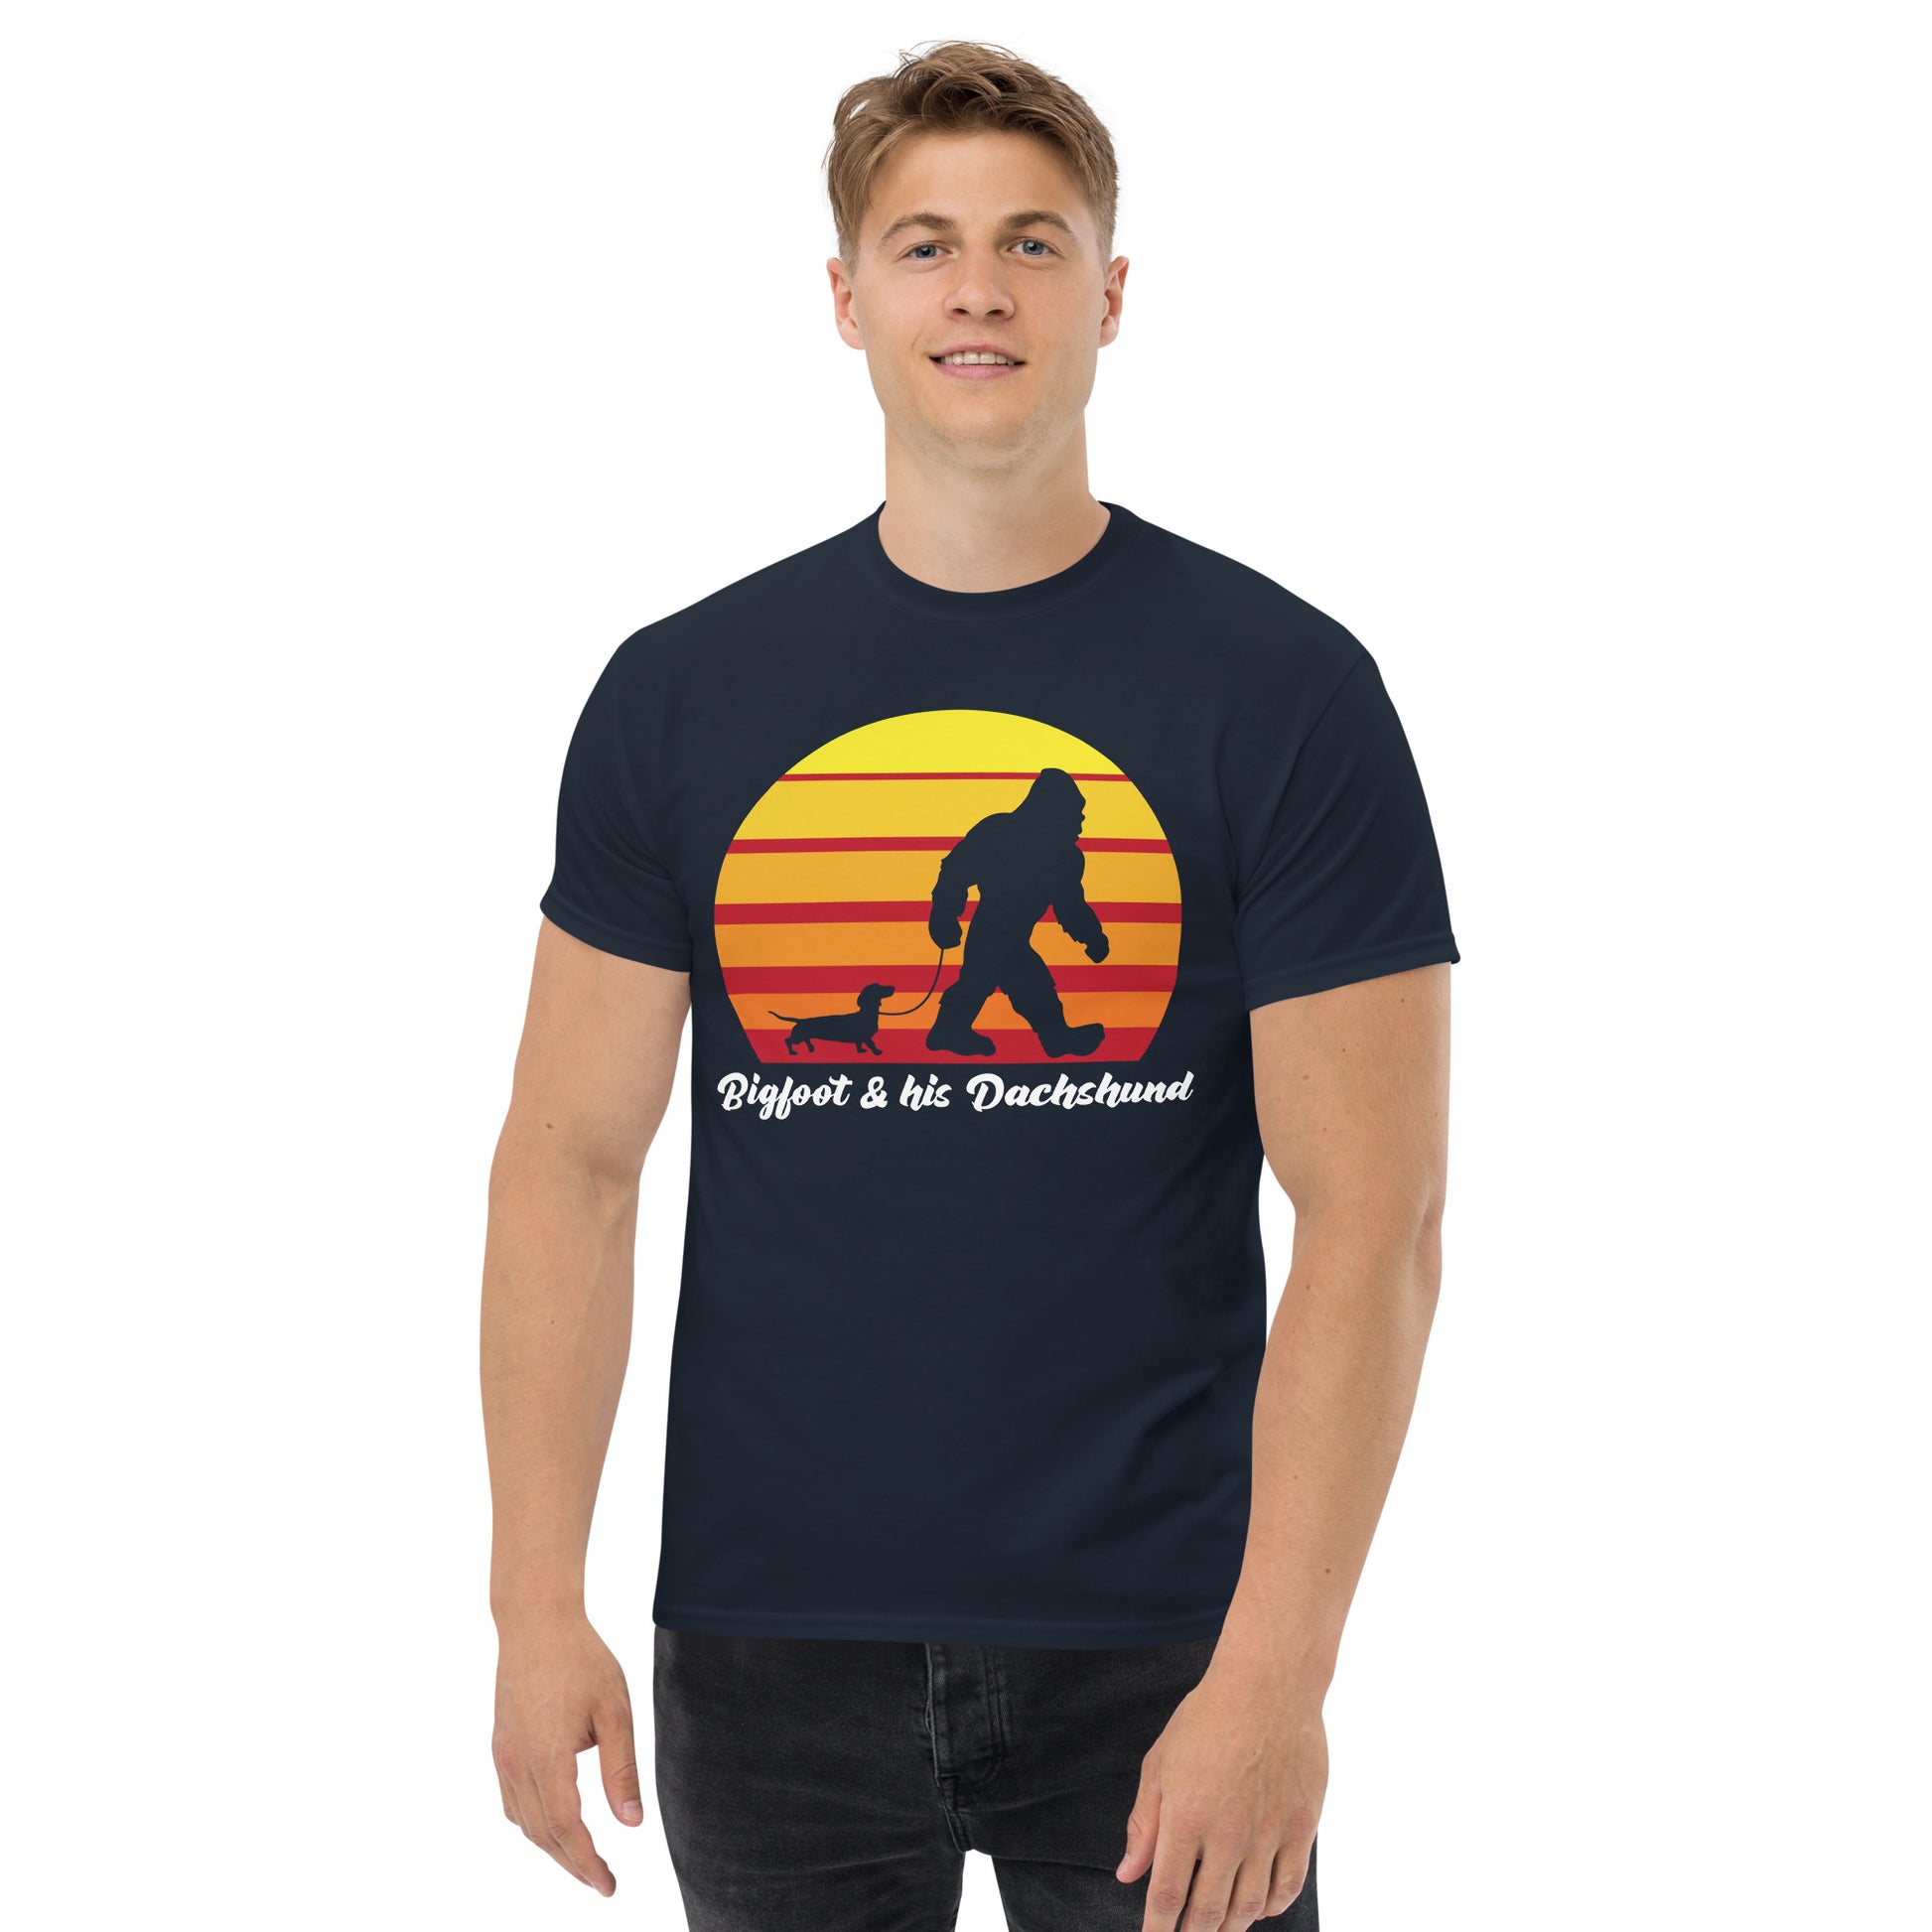 Big foot and his Dachshund men’s navy t-shirt by Dog Artistry.